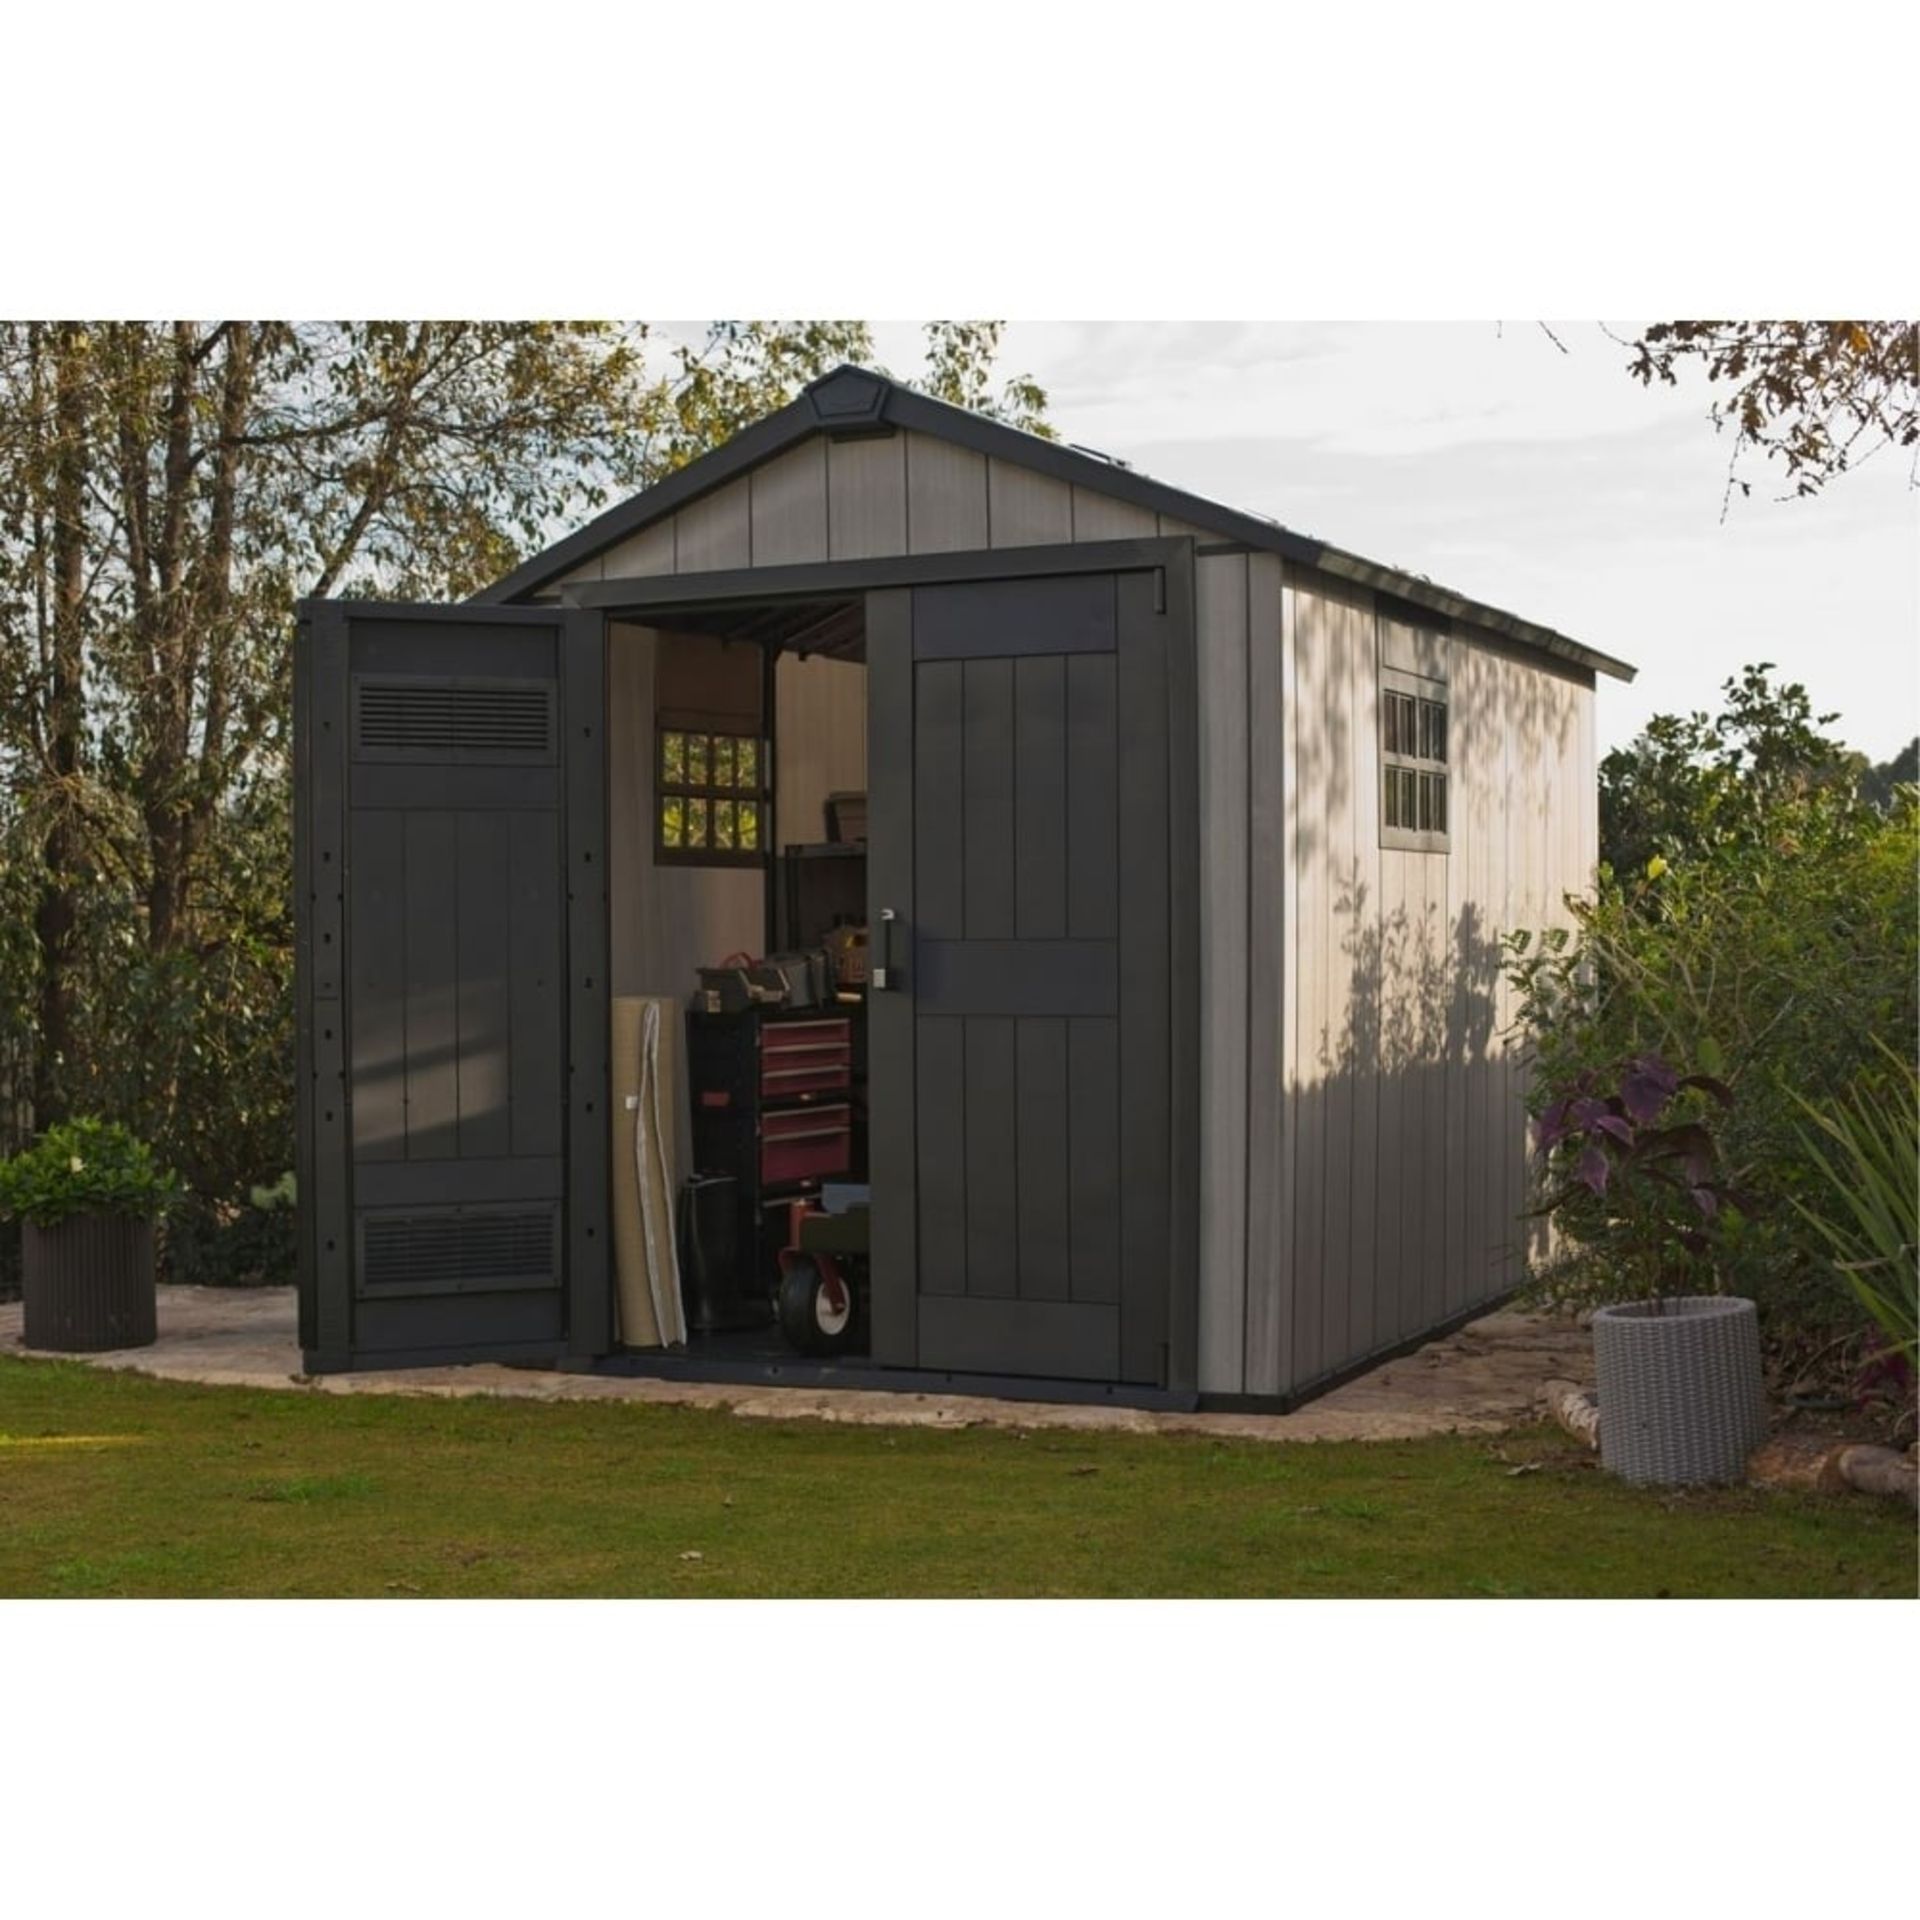 Keter Oakland 7511 Shed - as new but unboxed on pallet